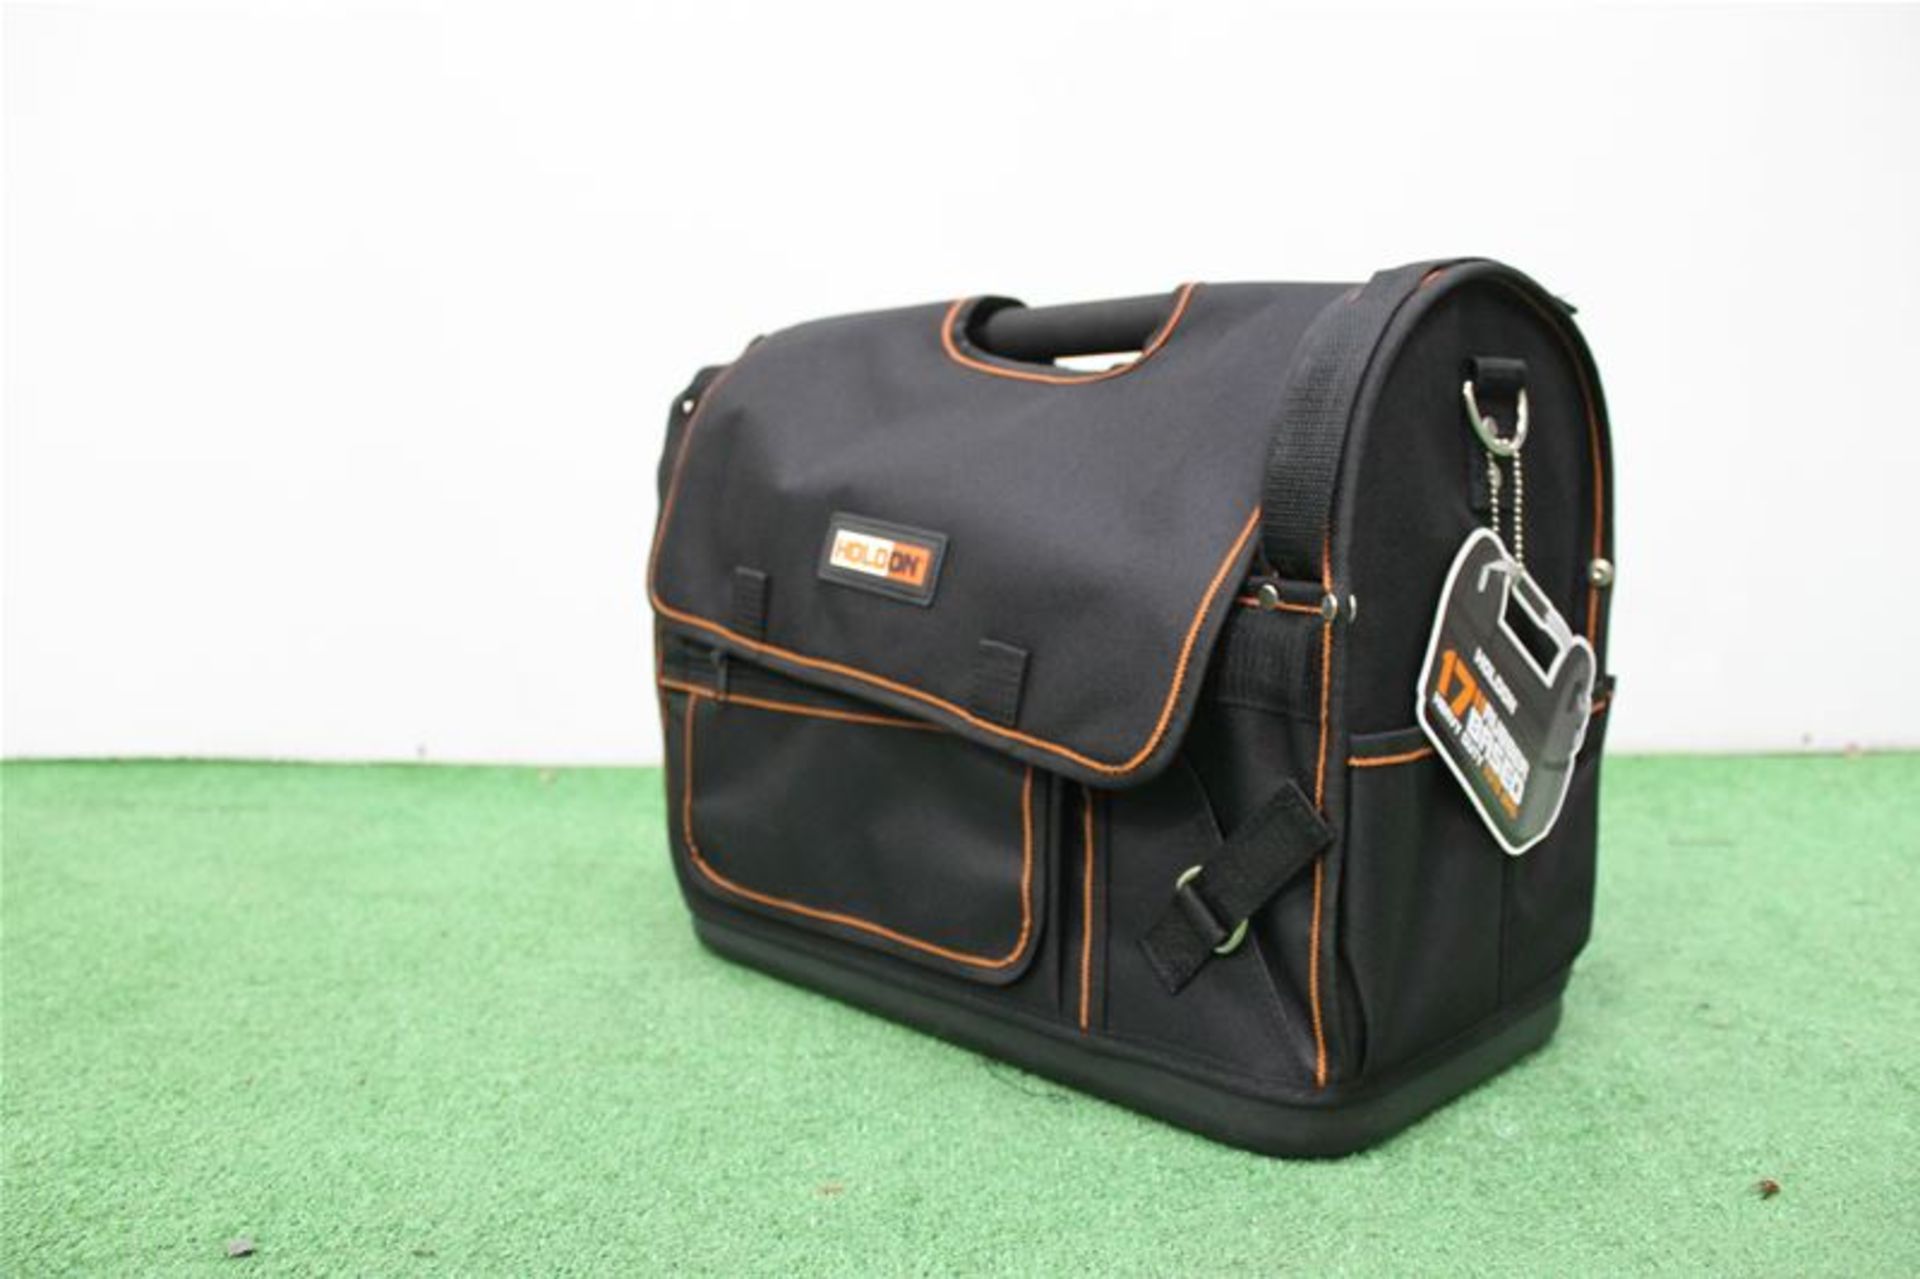 HOLDON Heavy Duty 17in Rubber Based Tote Bag